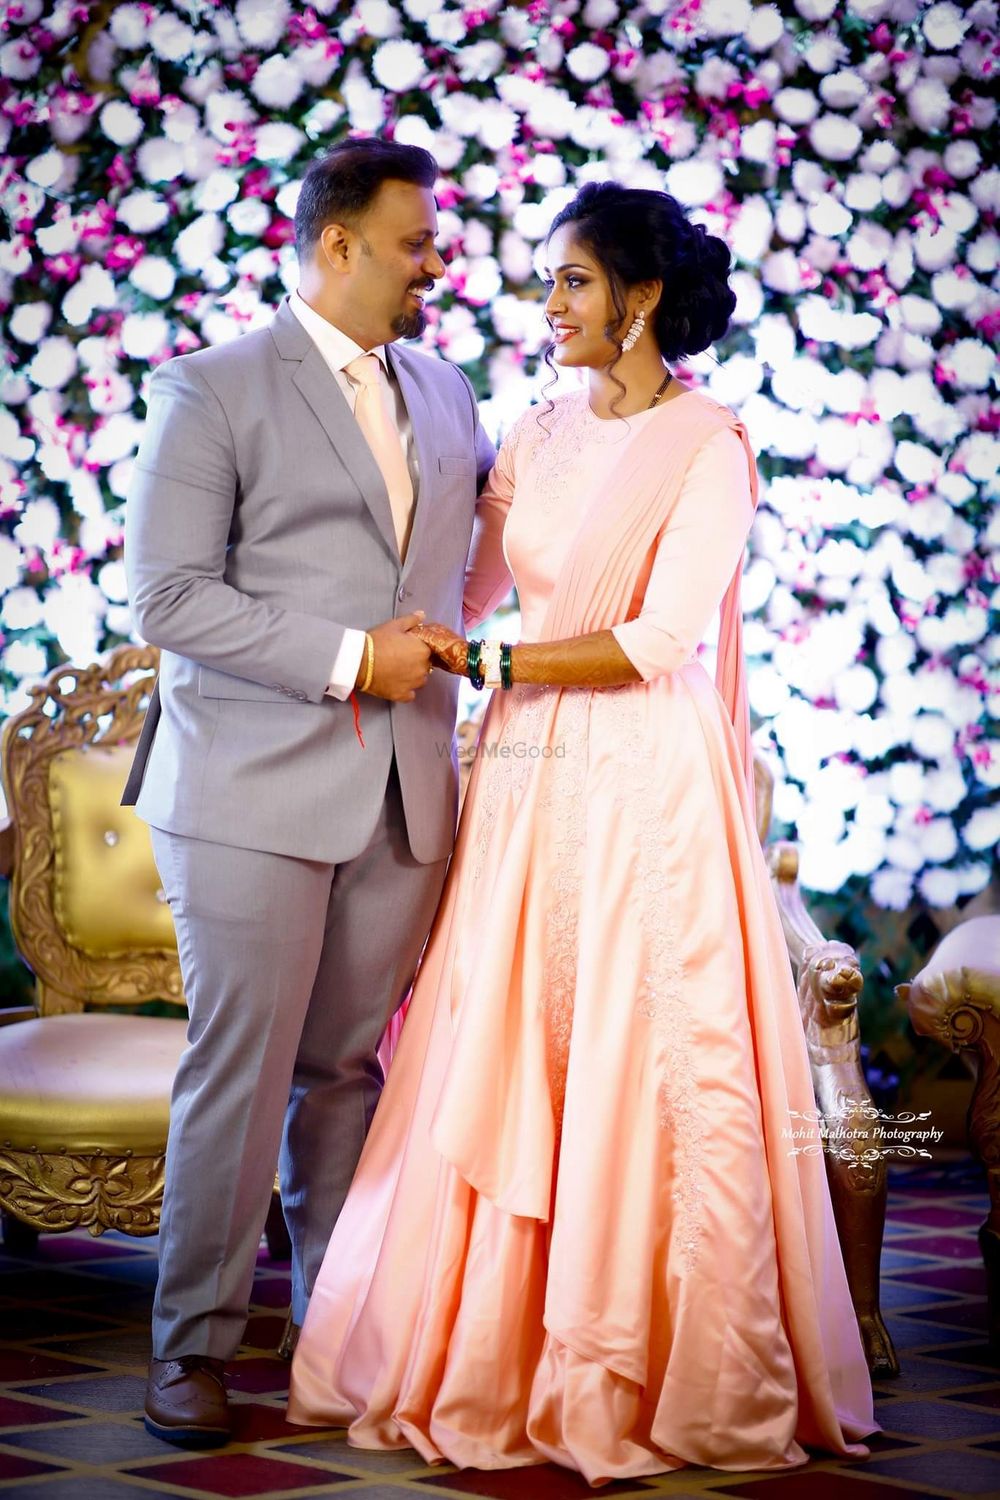 Photo From Anushka's wedding - By Sneha SK Makeovers